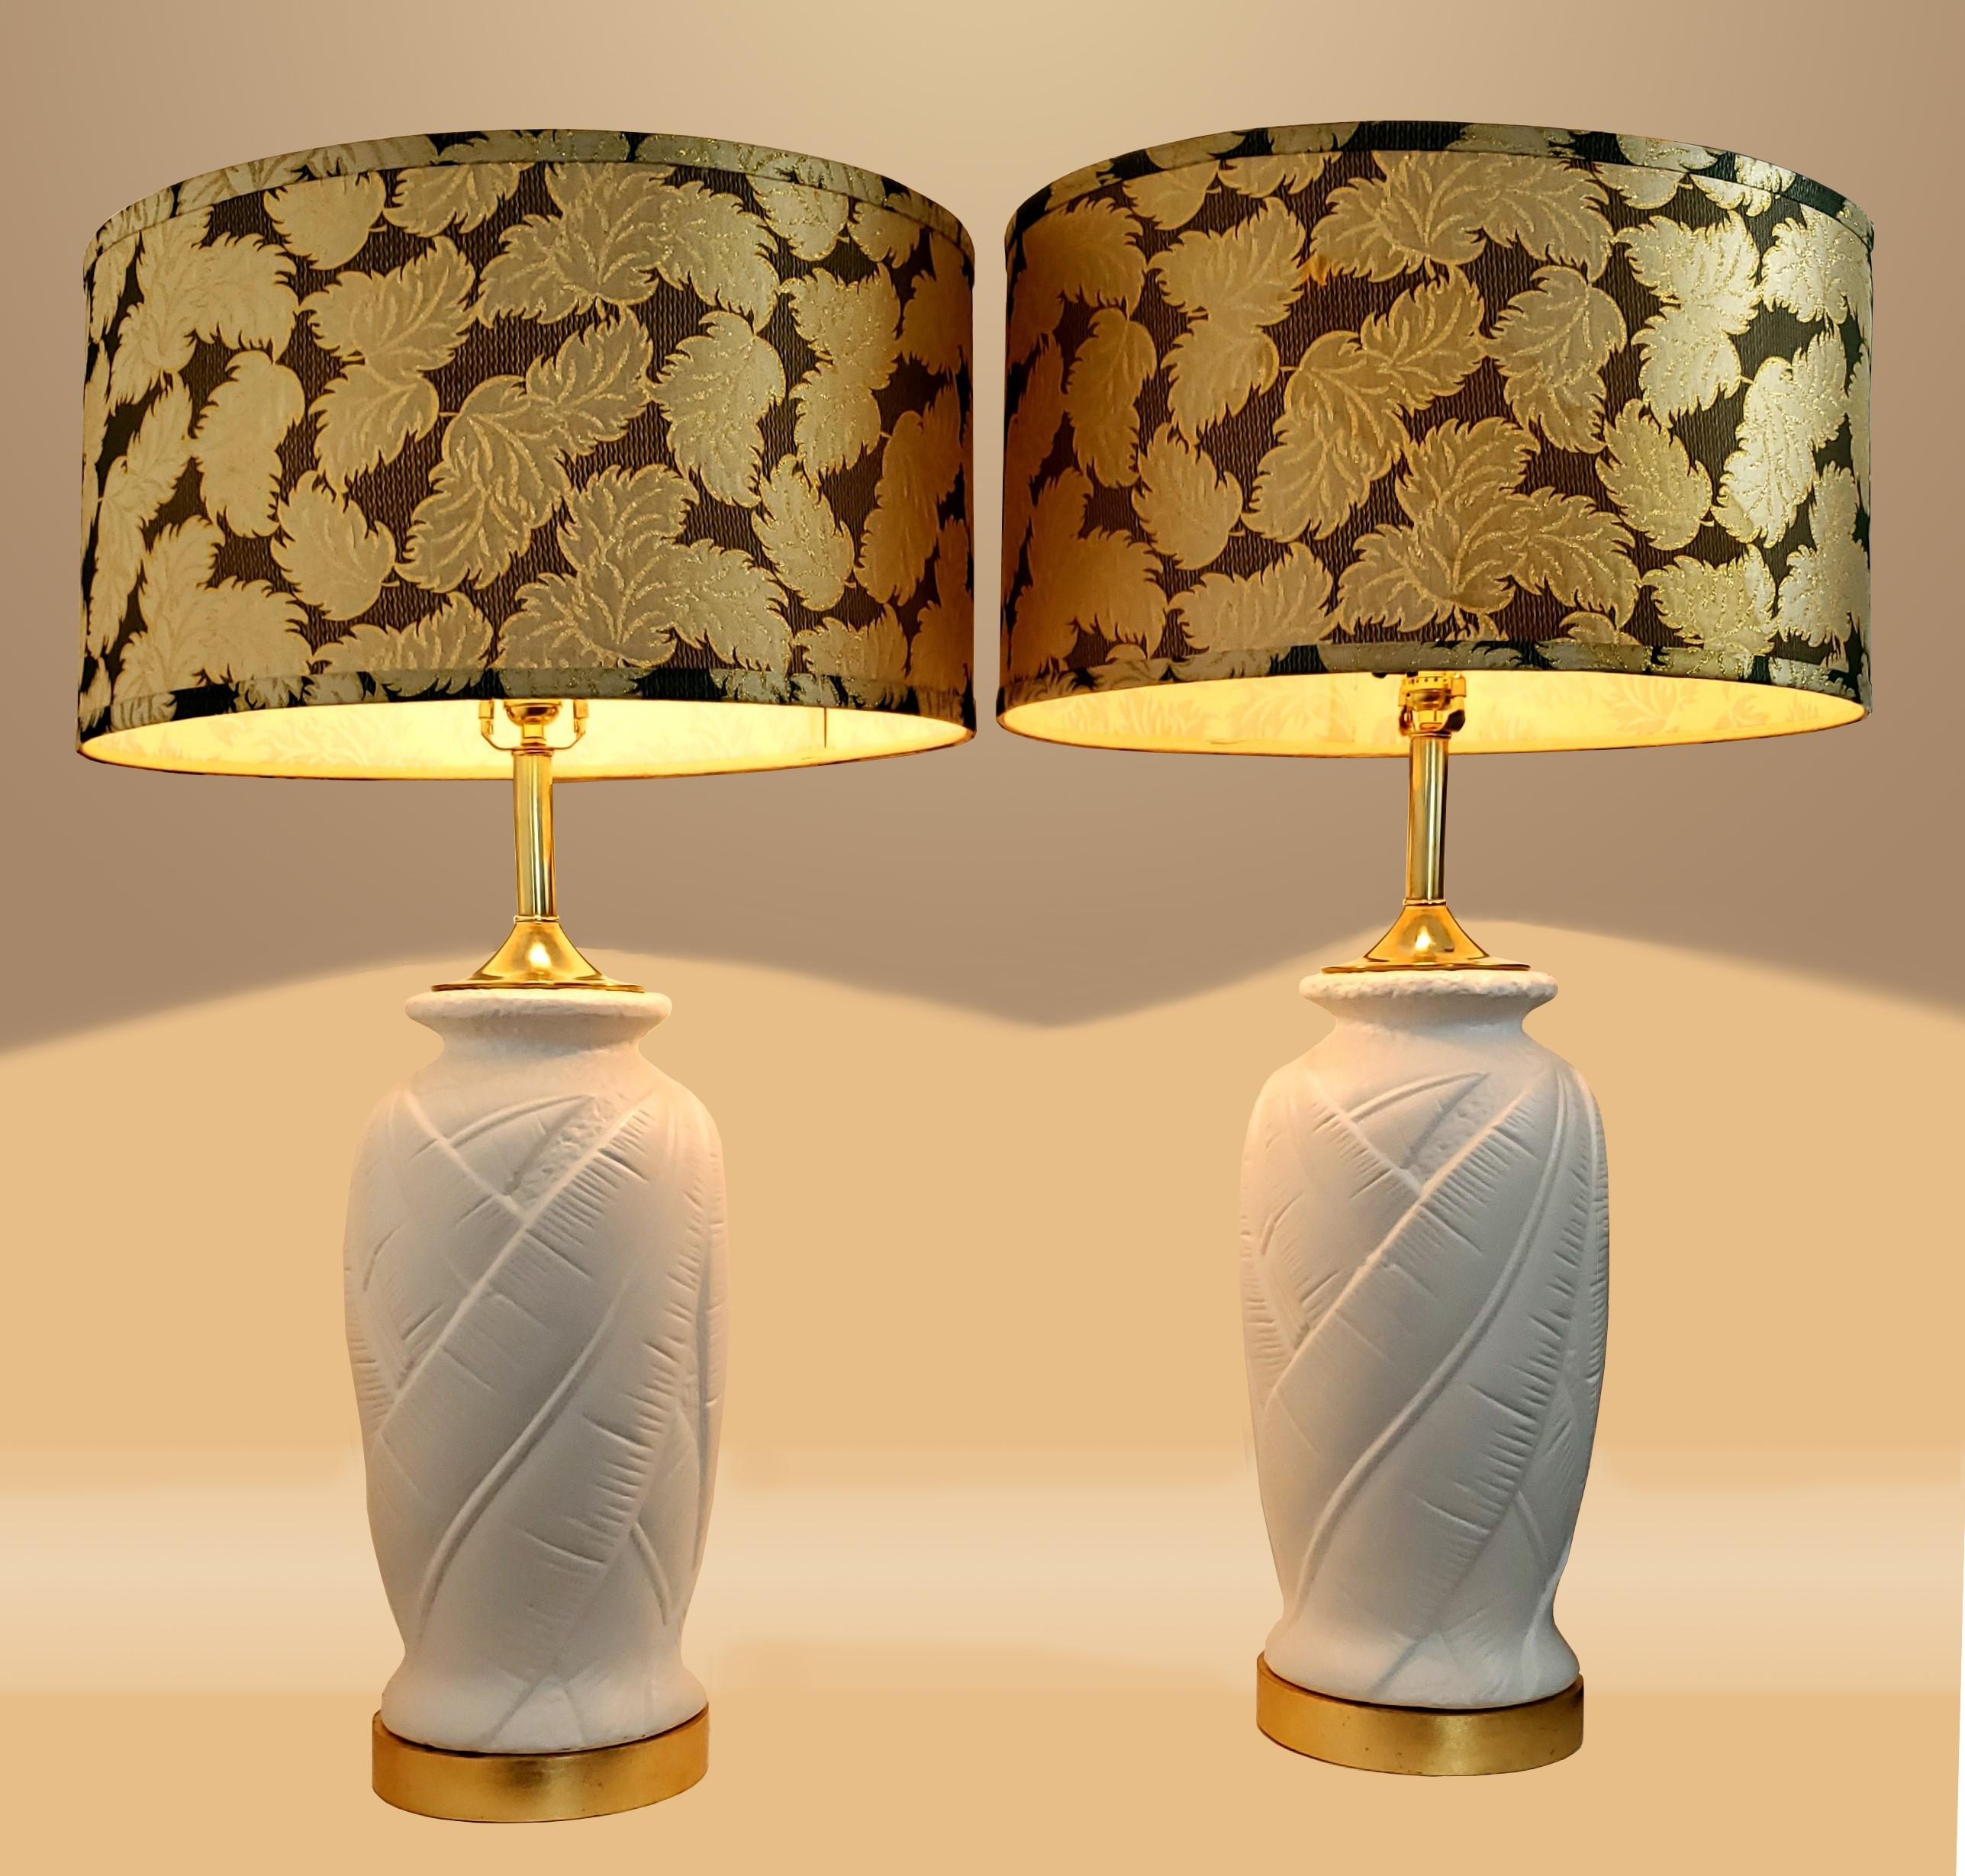 Pair of vintage restored white plaster palm tree leaf lamps with decorative vintage lamp shades, circa 1980. These lamps were completely disassembled, professionally primed and painted white with new gold leaf on the wooded bases.
Vintage lamp